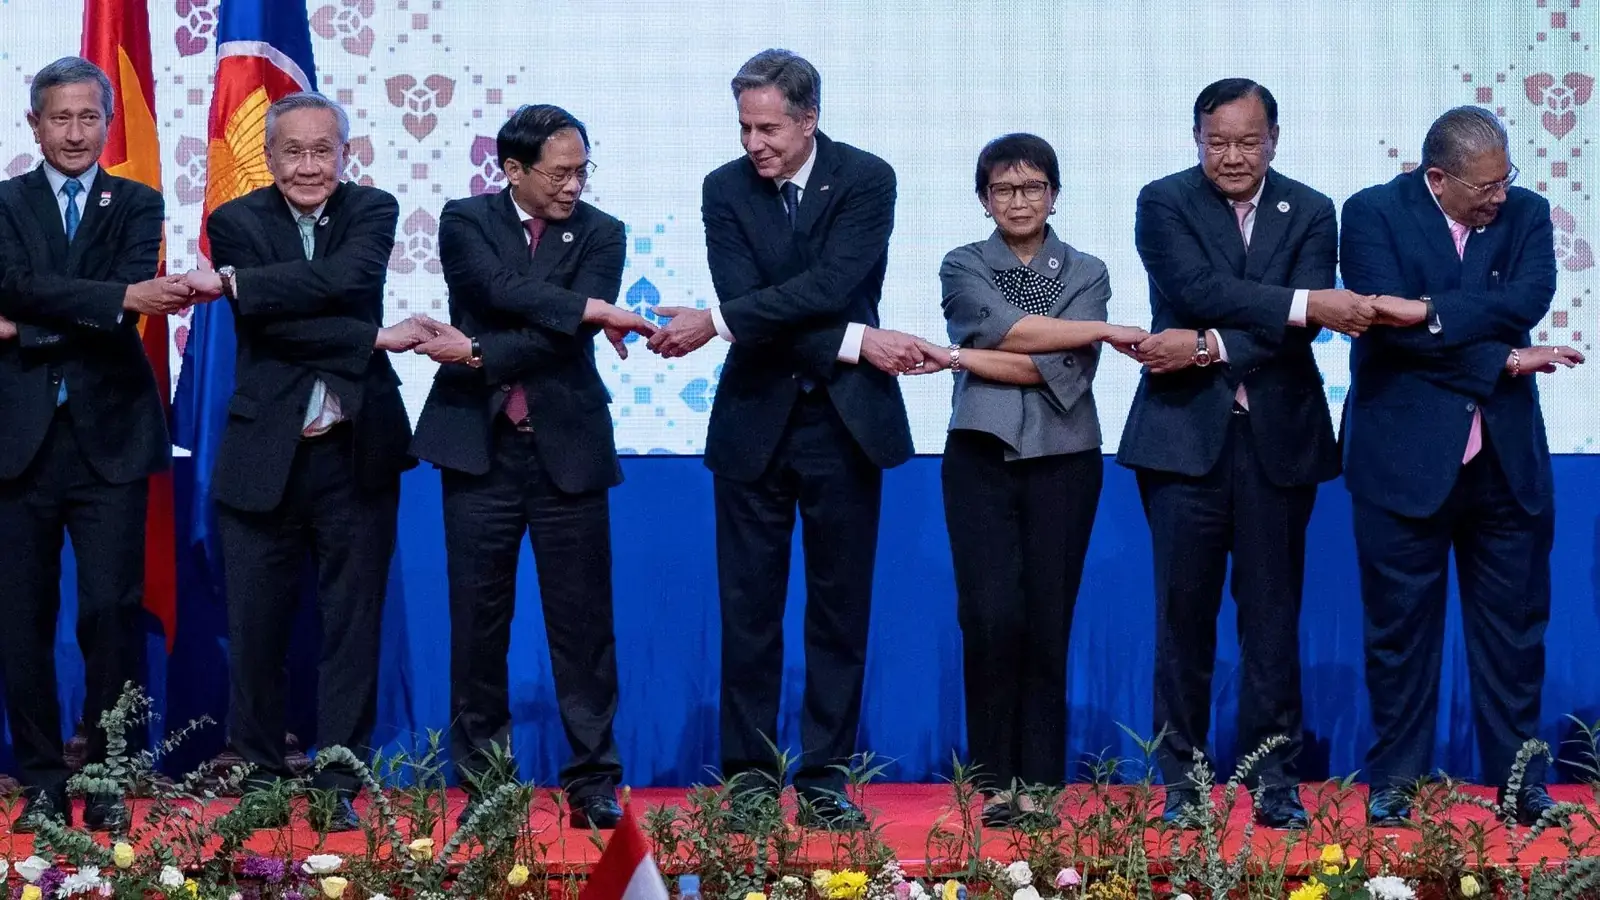 U.S. Secretary of State Antony Blinken and others do the "ASEAN-way handshake" for a group photo during the U.S.-ASEAN ministerial meeting in Phnom Penh, Cambodia on August 4, 2022.